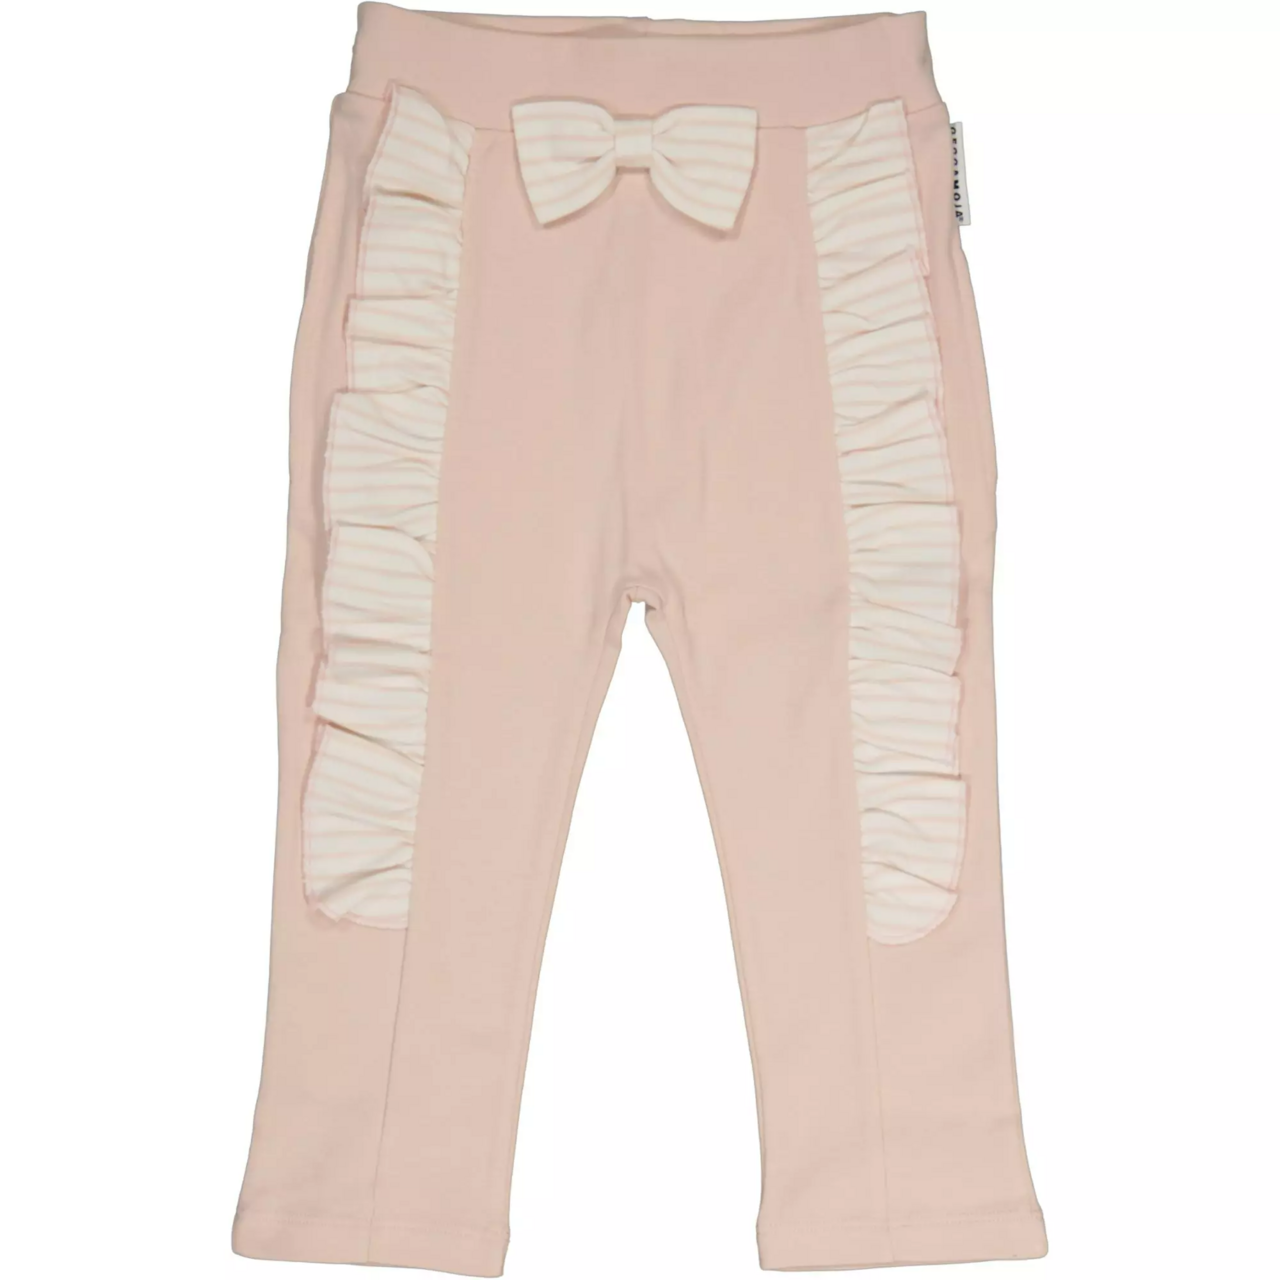 Flounce pant L.pink/offwhite 74/80